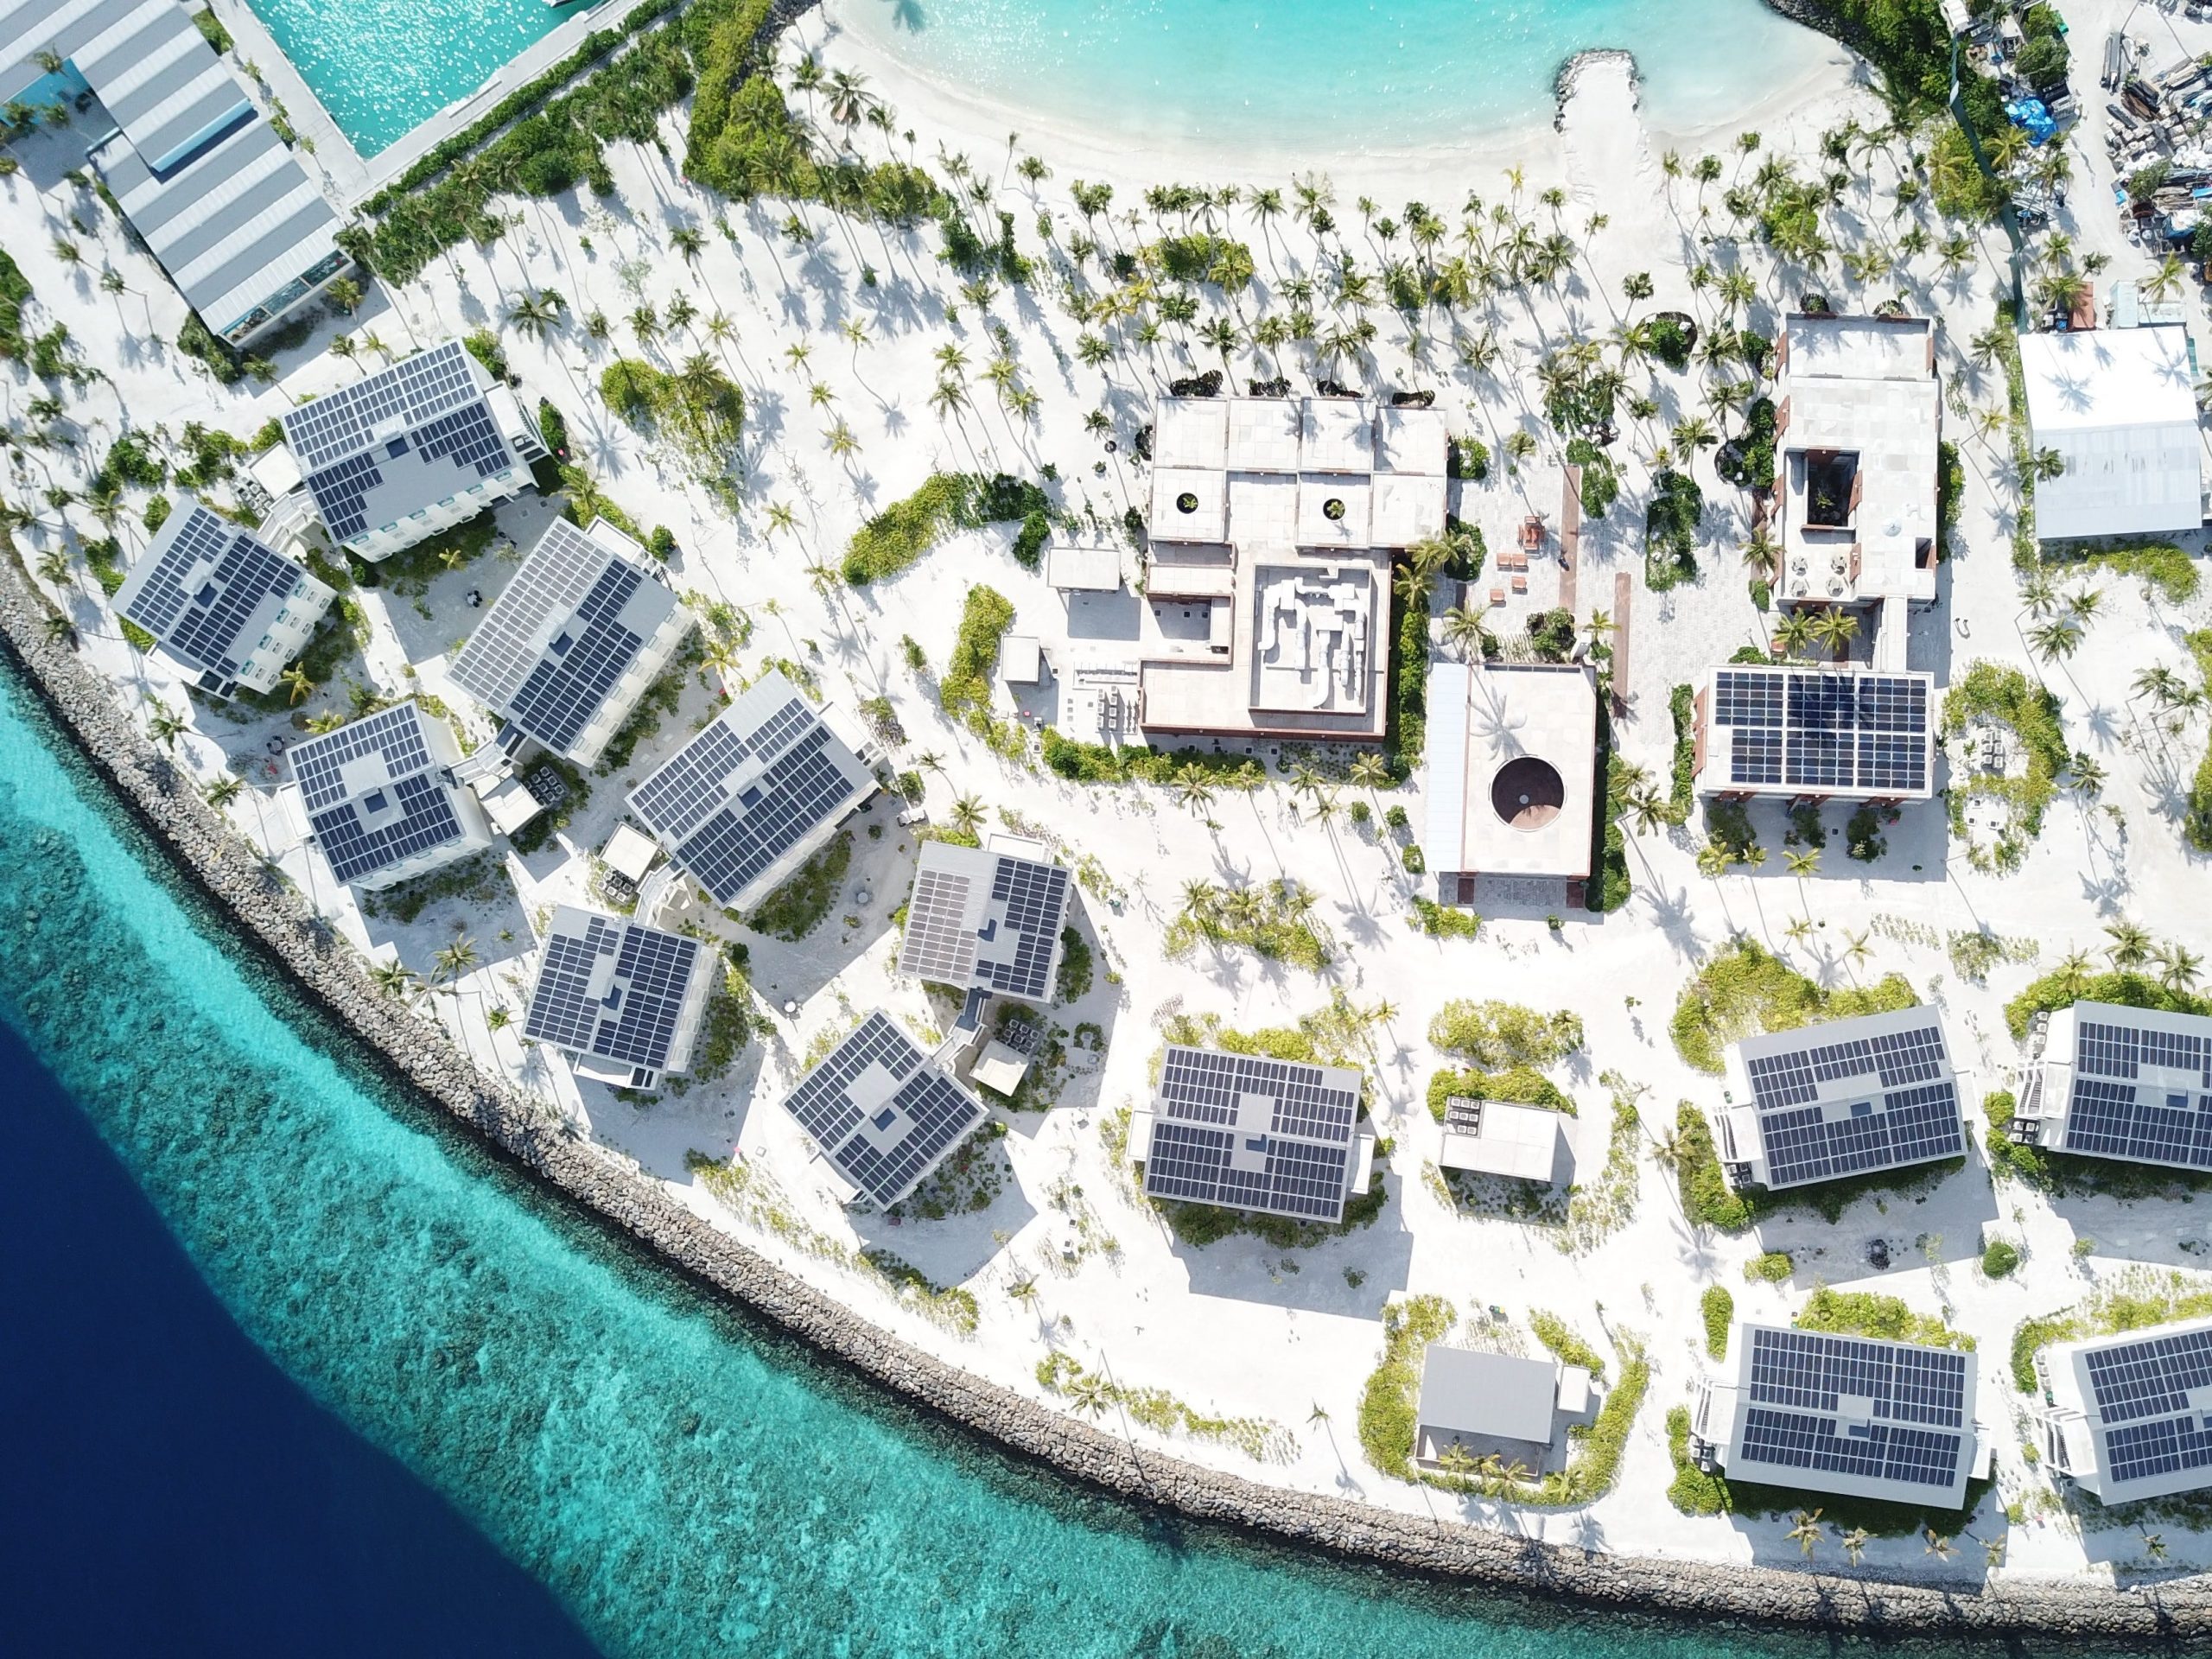 An ariel drone shot of Fari Campus shows staff buildings with seaviews.